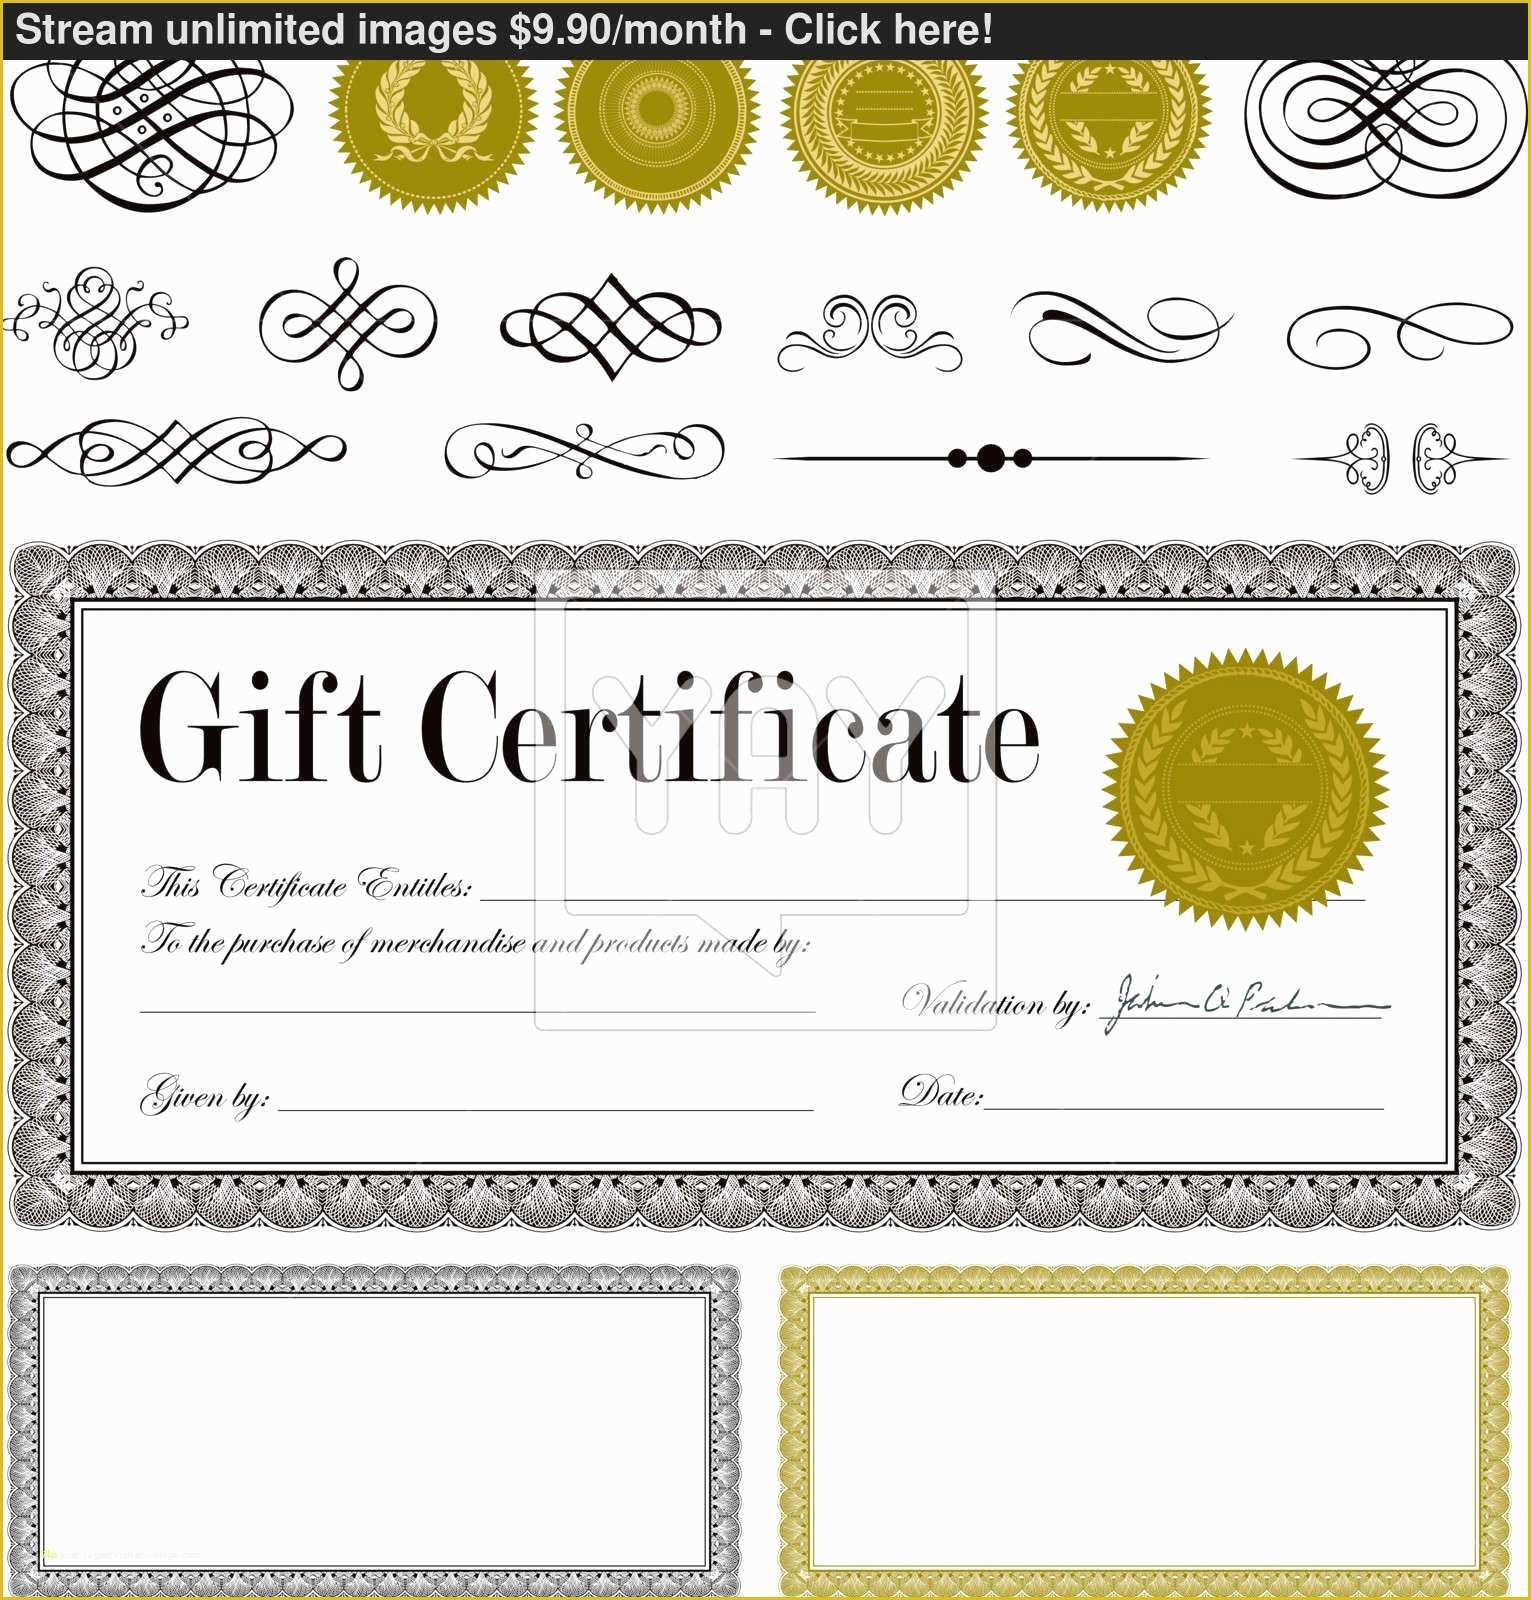 Gift Certificate Template Free Of Restaurant Gift Certificate Template Free